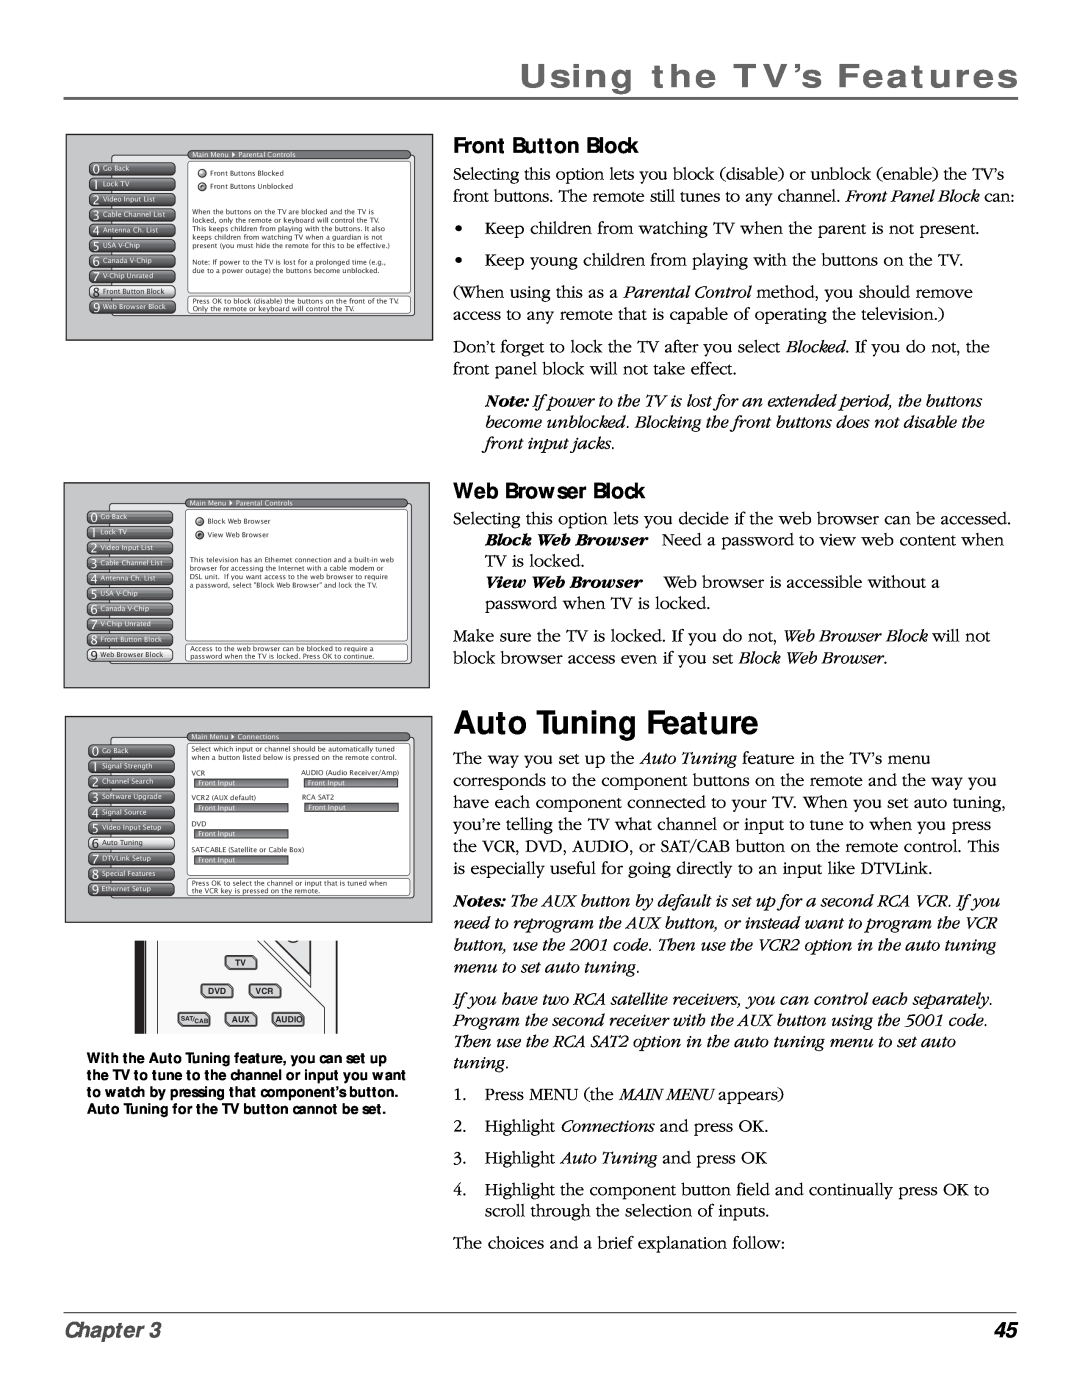 RCA scenium manual Auto Tuning Feature, Front Button Block, Web Browser Block, Using the TV’s Features, Chapter 